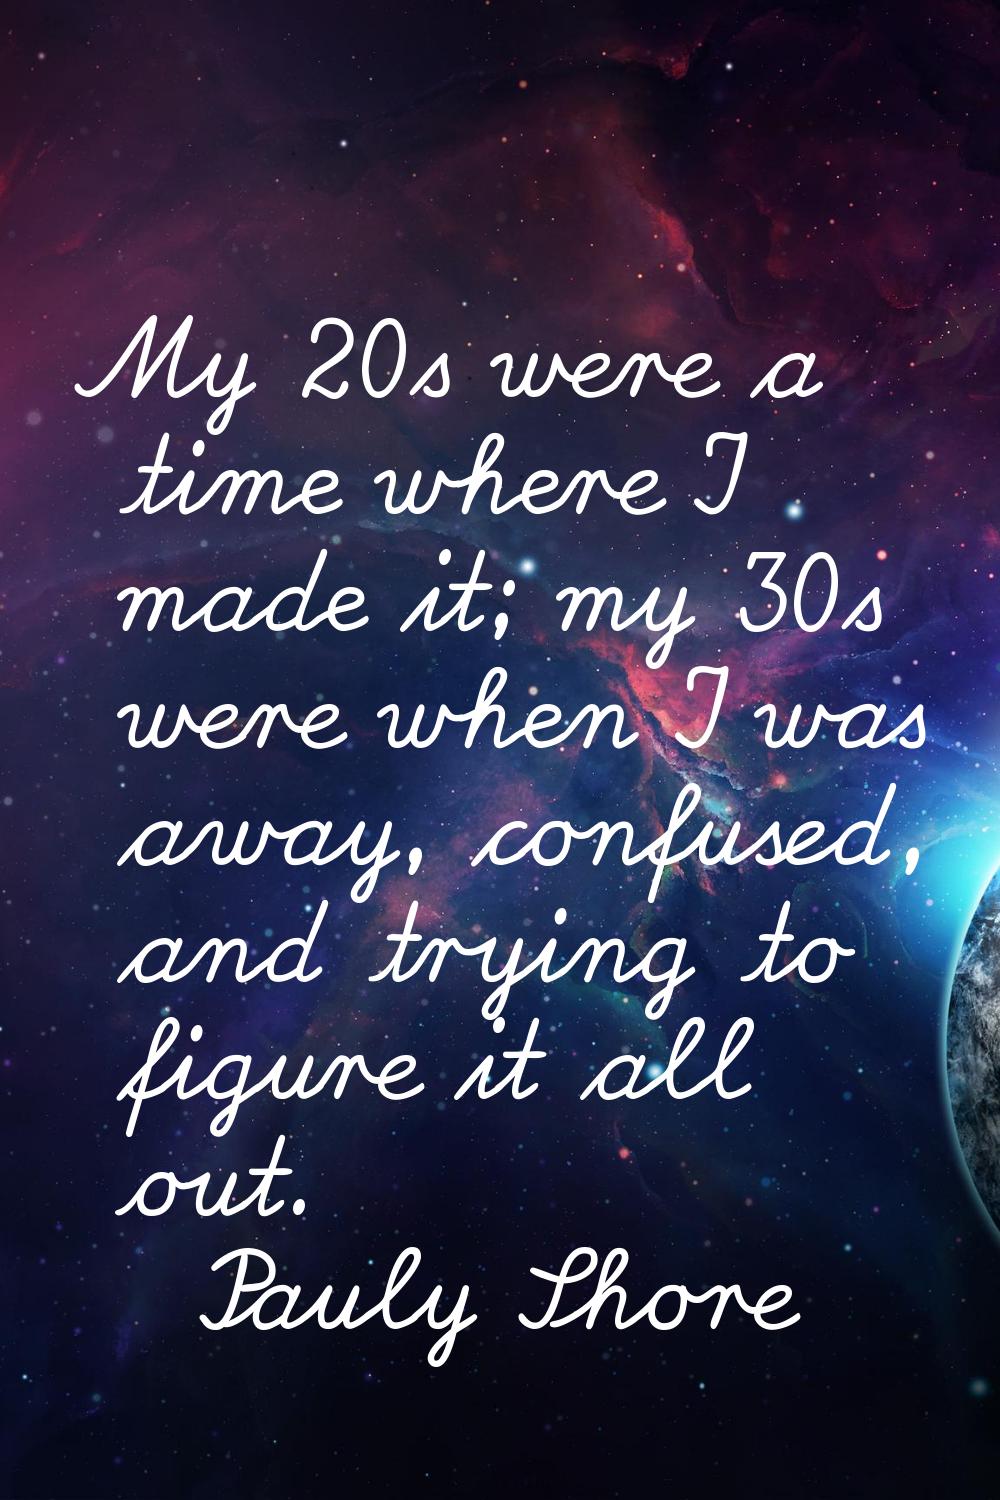 My 20s were a time where I made it; my 30s were when I was away, confused, and trying to figure it 